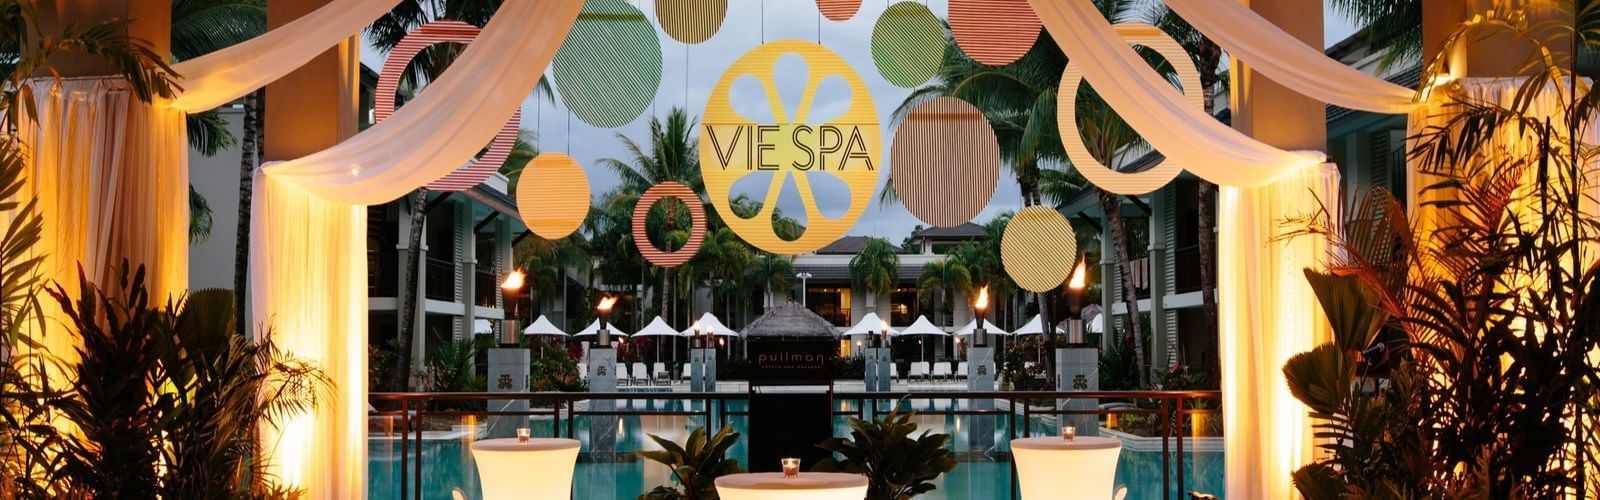 Vie spa product launch at  Pullman port douglas sea temple resort and spa